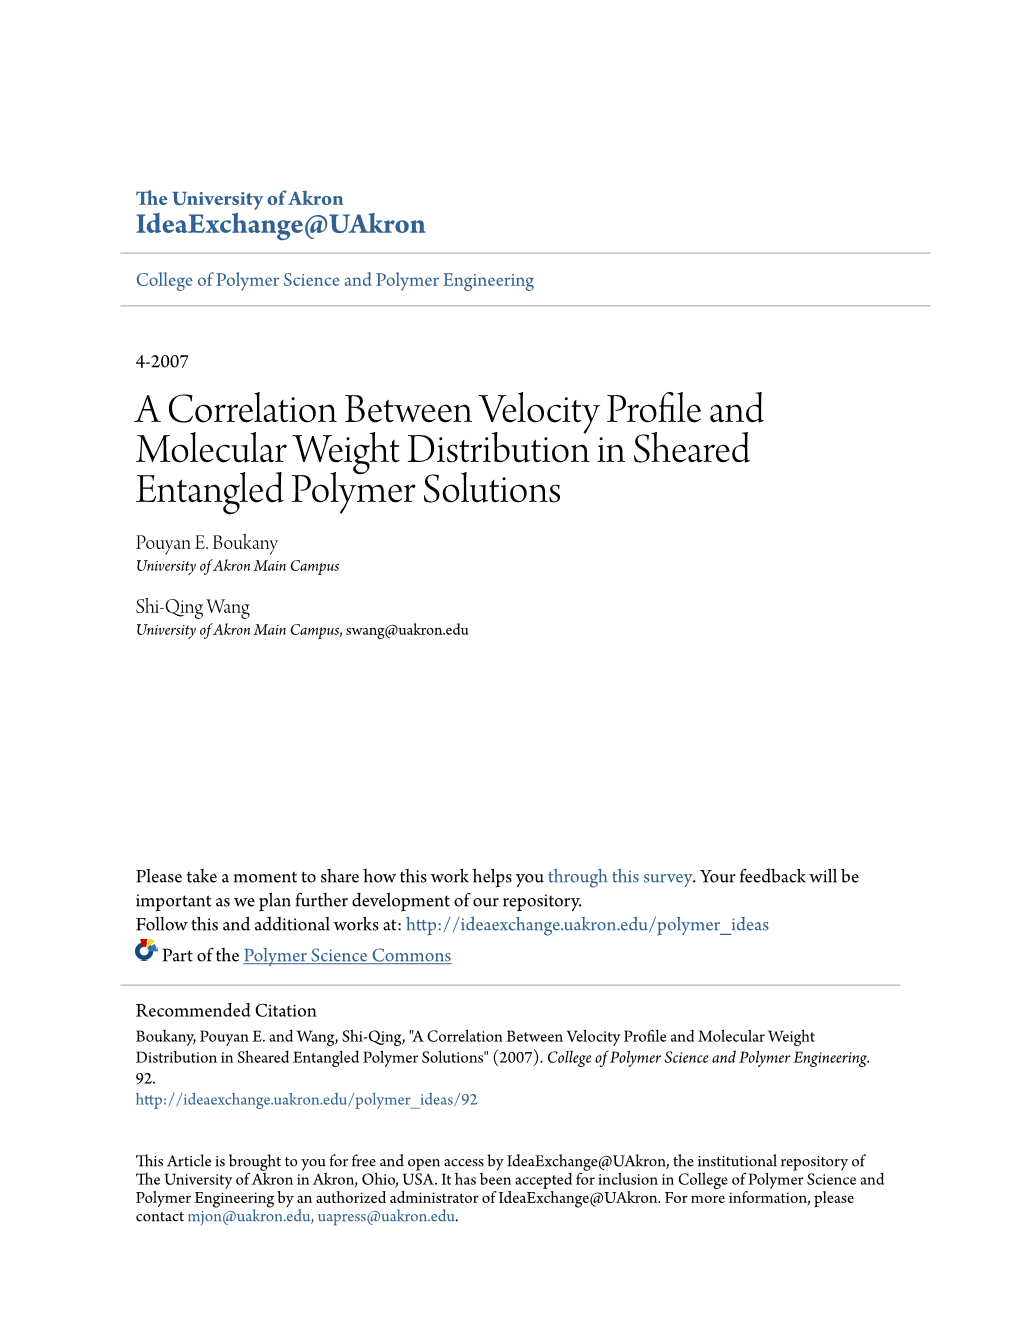 A Correlation Between Velocity Profile and Molecular Weight Distribution in Sheared Entangled Polymer Solutions Pouyan E